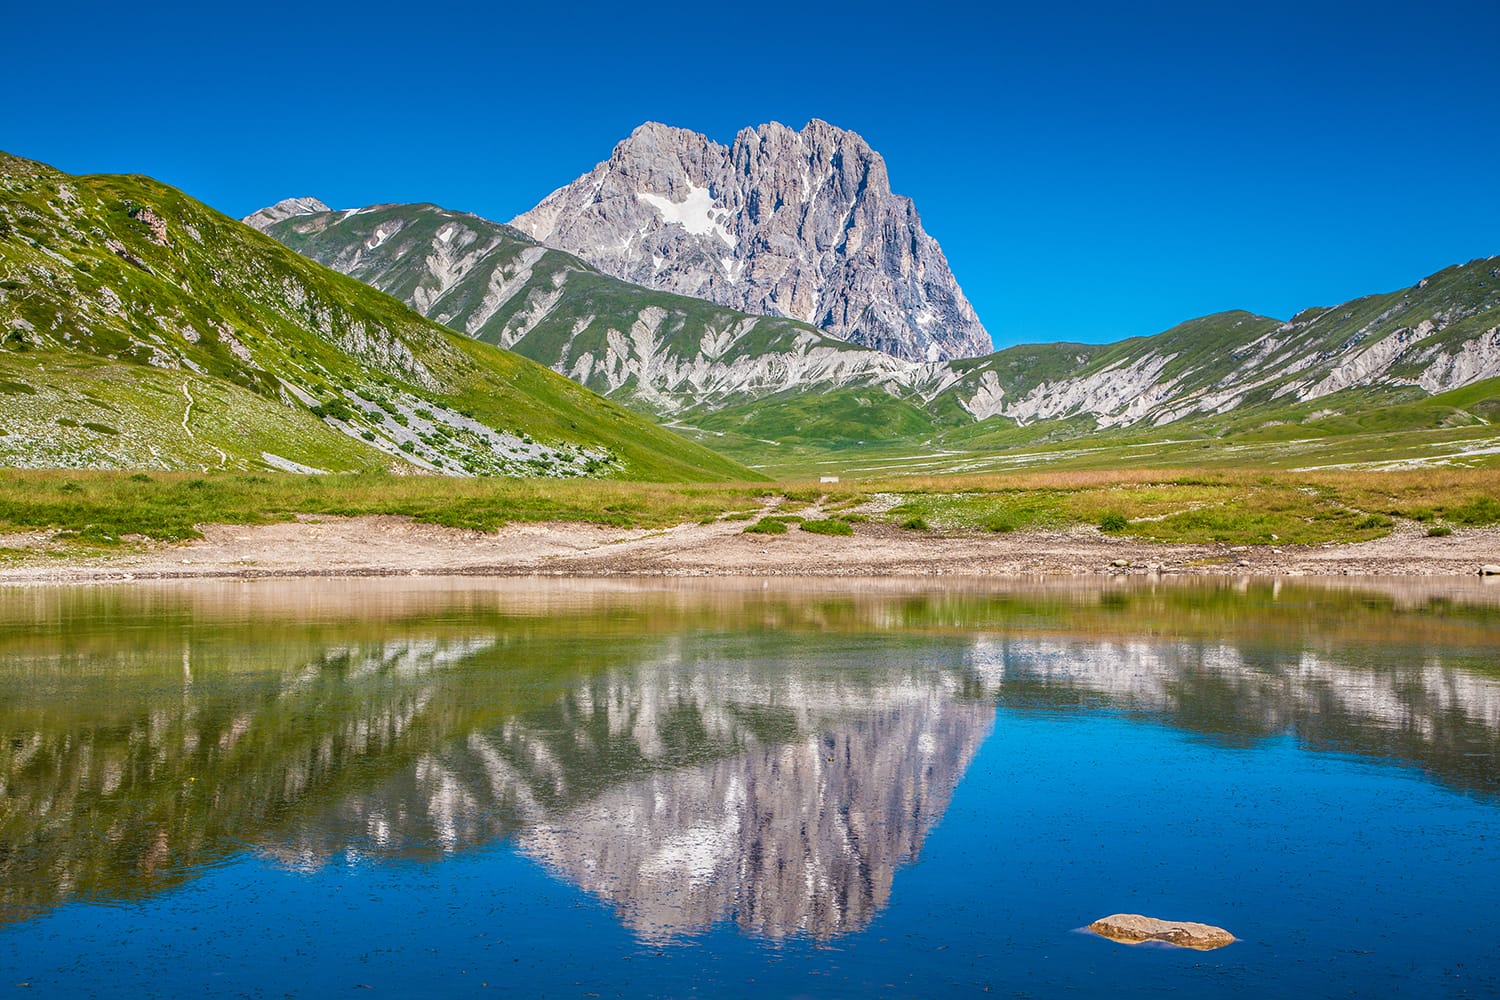 Panoramic view of beautiful landscape with Gran Sasso d'Italia peak at Campo Imperatore plateau in the Apennine Mountains, Abruzzo National Park, Italy